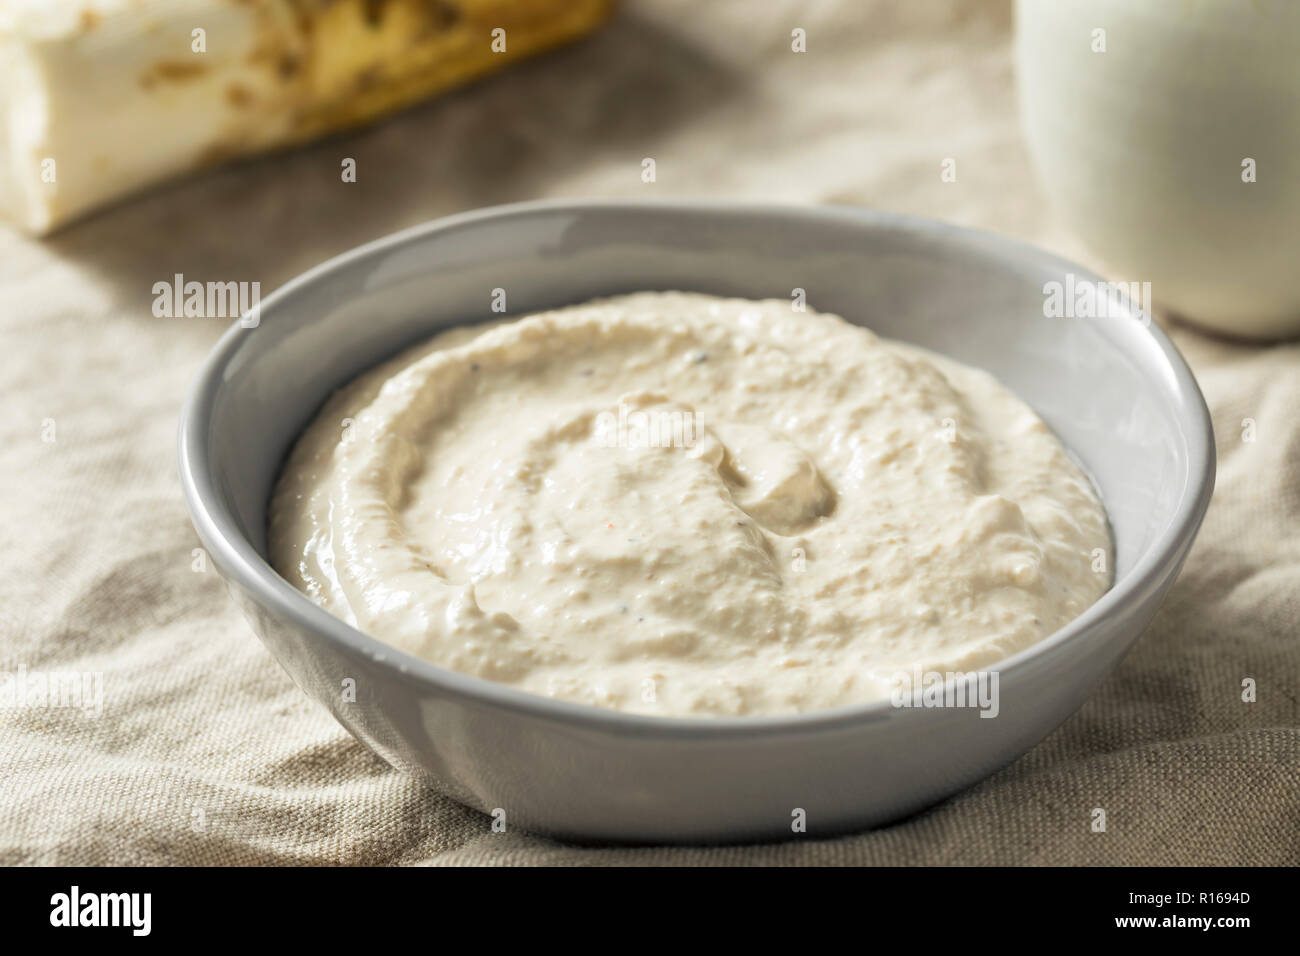 Spicy Homemade Horseradish Sauce in a Bowl Stock Photo